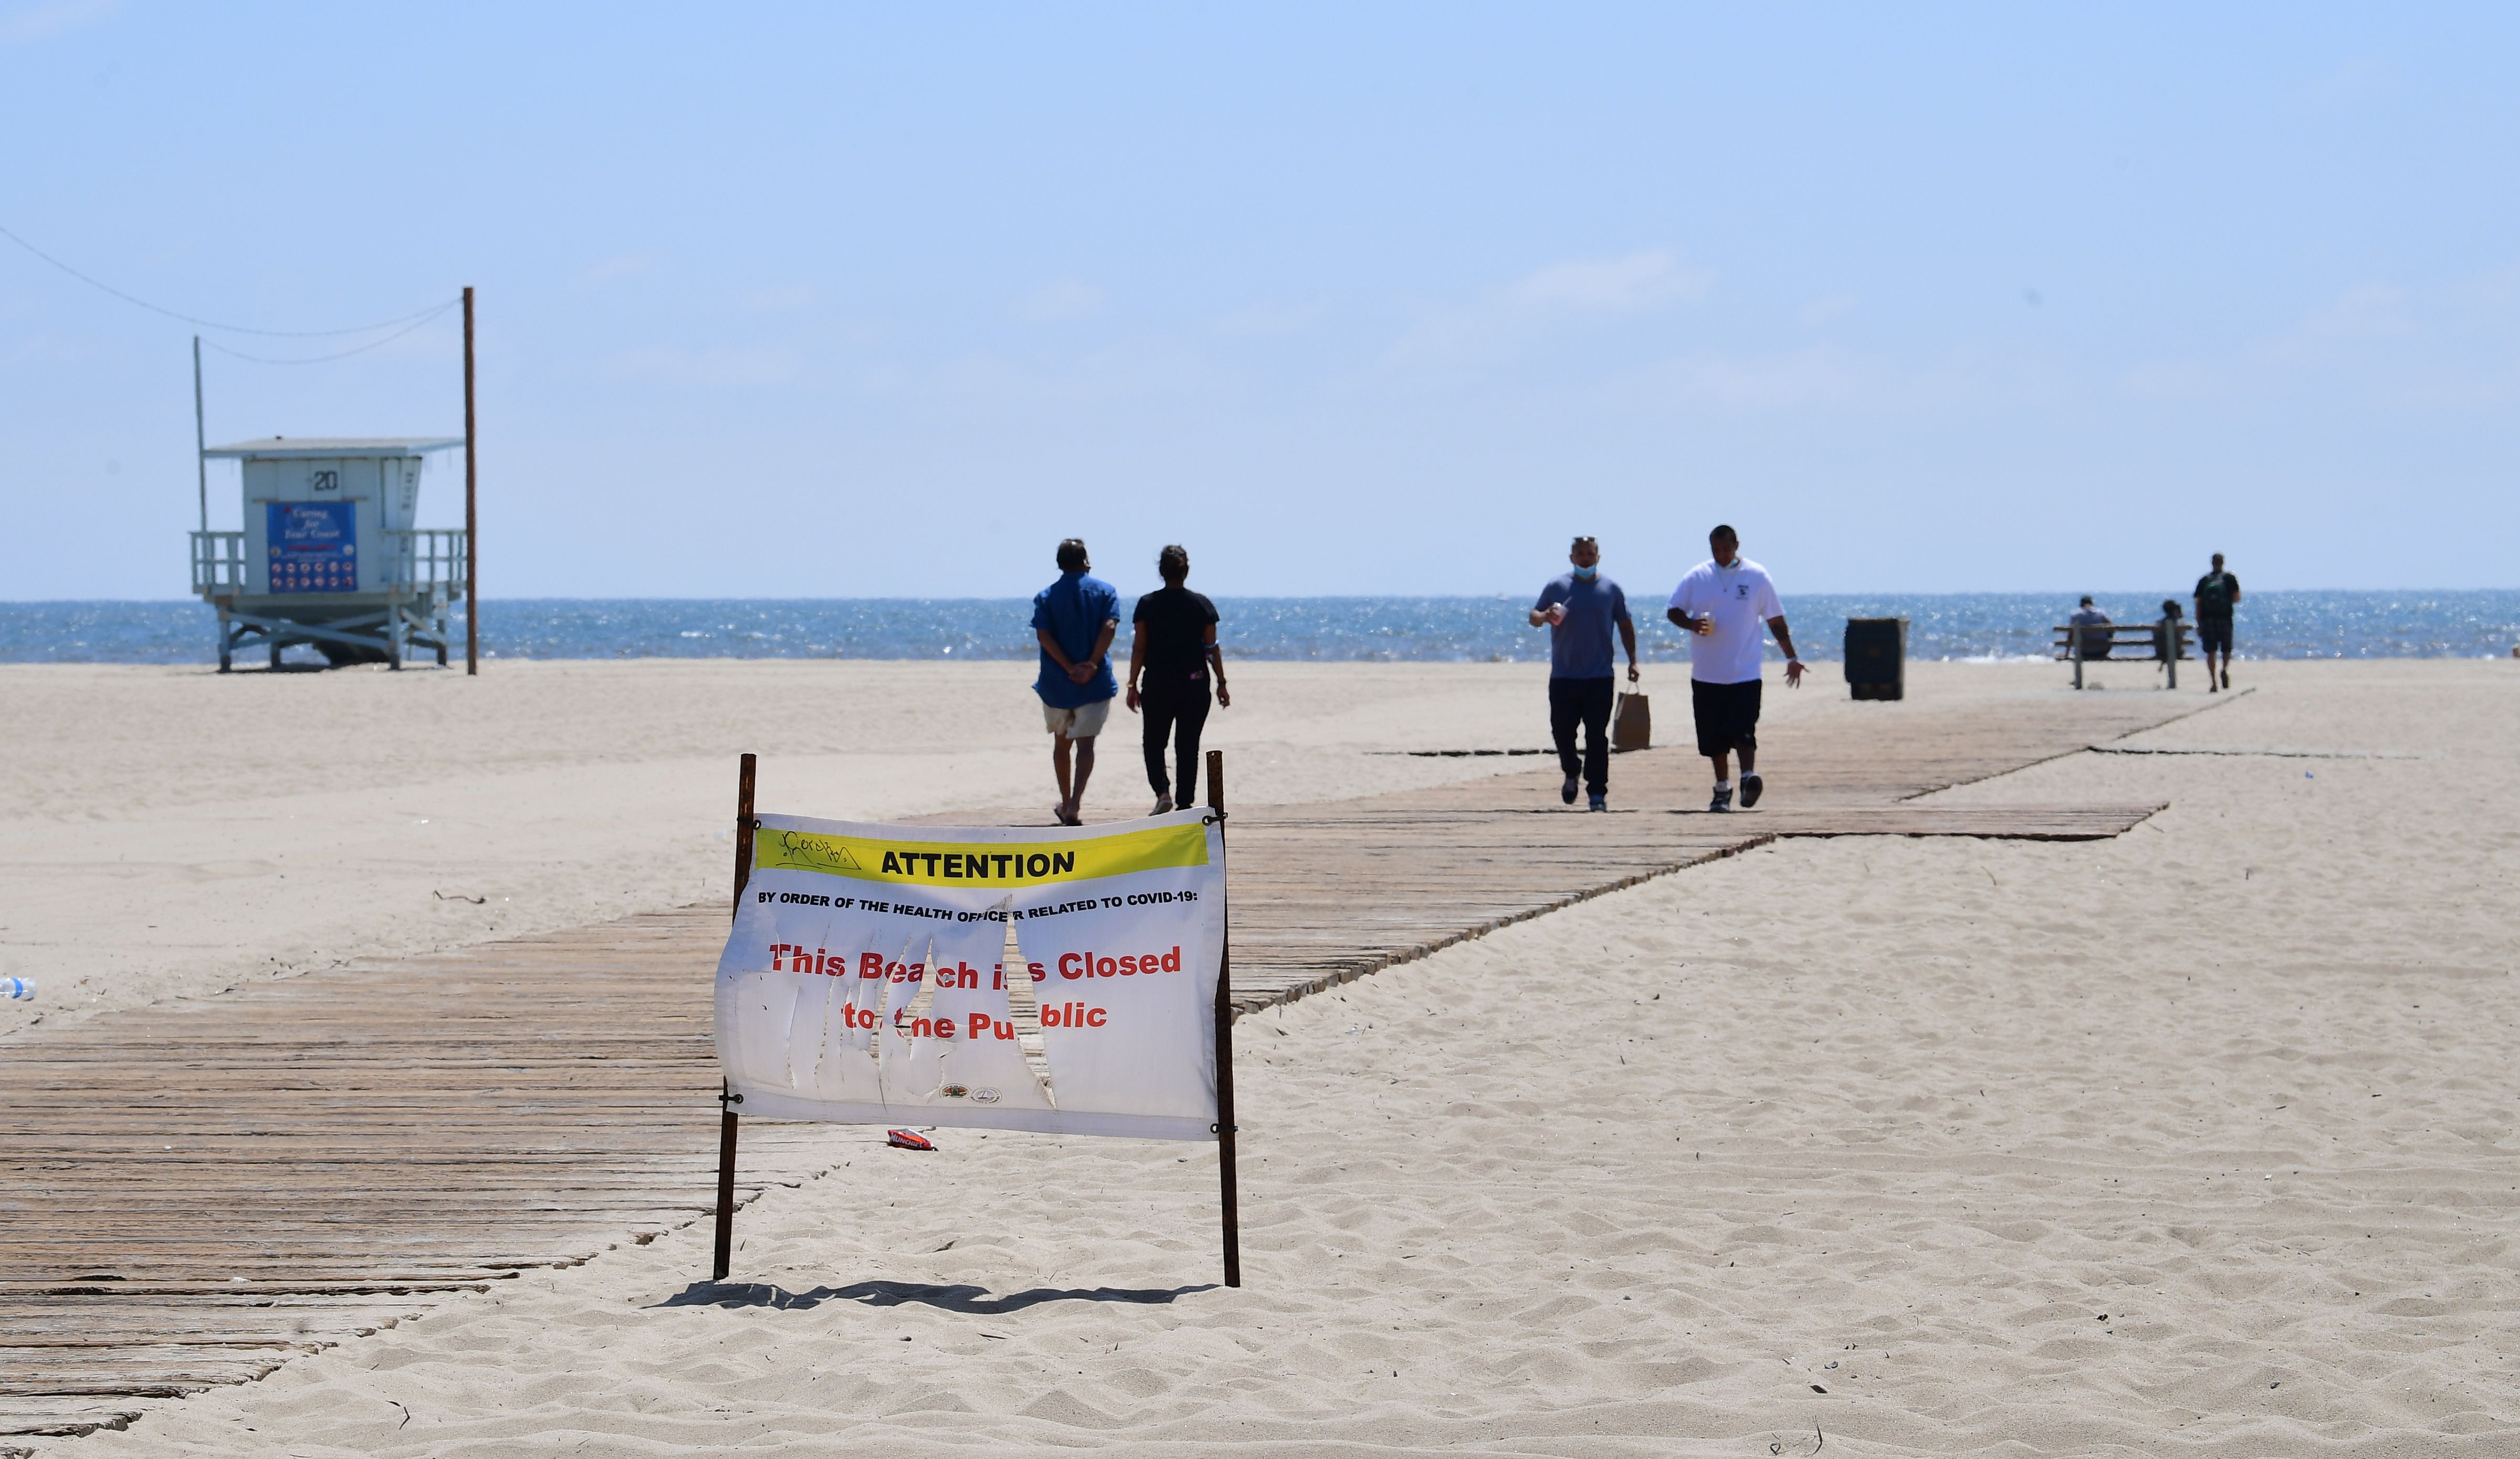 People visit Santa Monica Beach in Santa Monica, California on May 11, 2020, despite a sign mentioning beach closure due to the coronavirus pandemic.(Photo by FREDERIC J. BROWN/AFP via Getty Images)